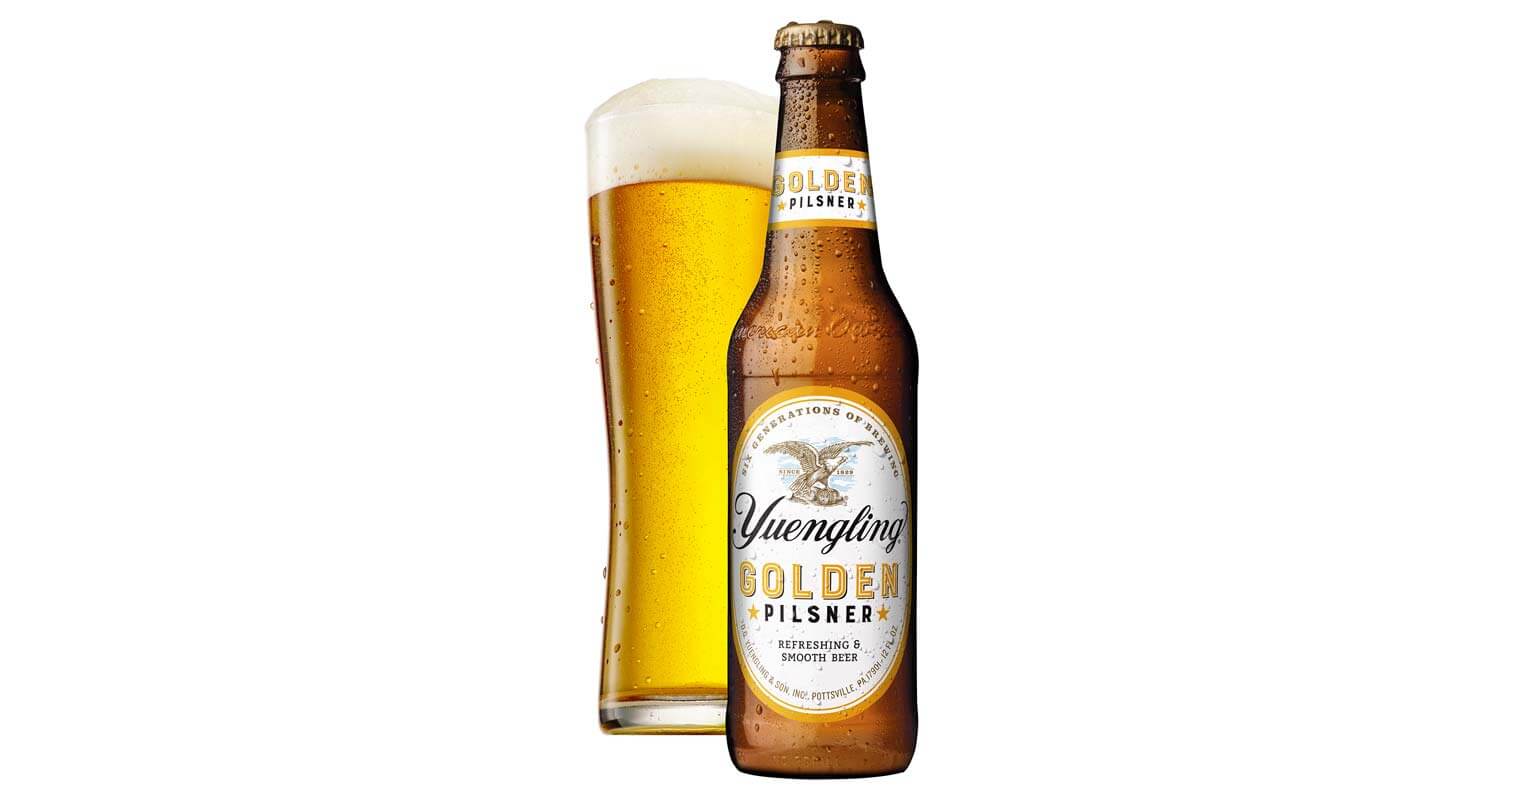 Yuengling's Golden Pilsner, bottle and glass on white, featured image